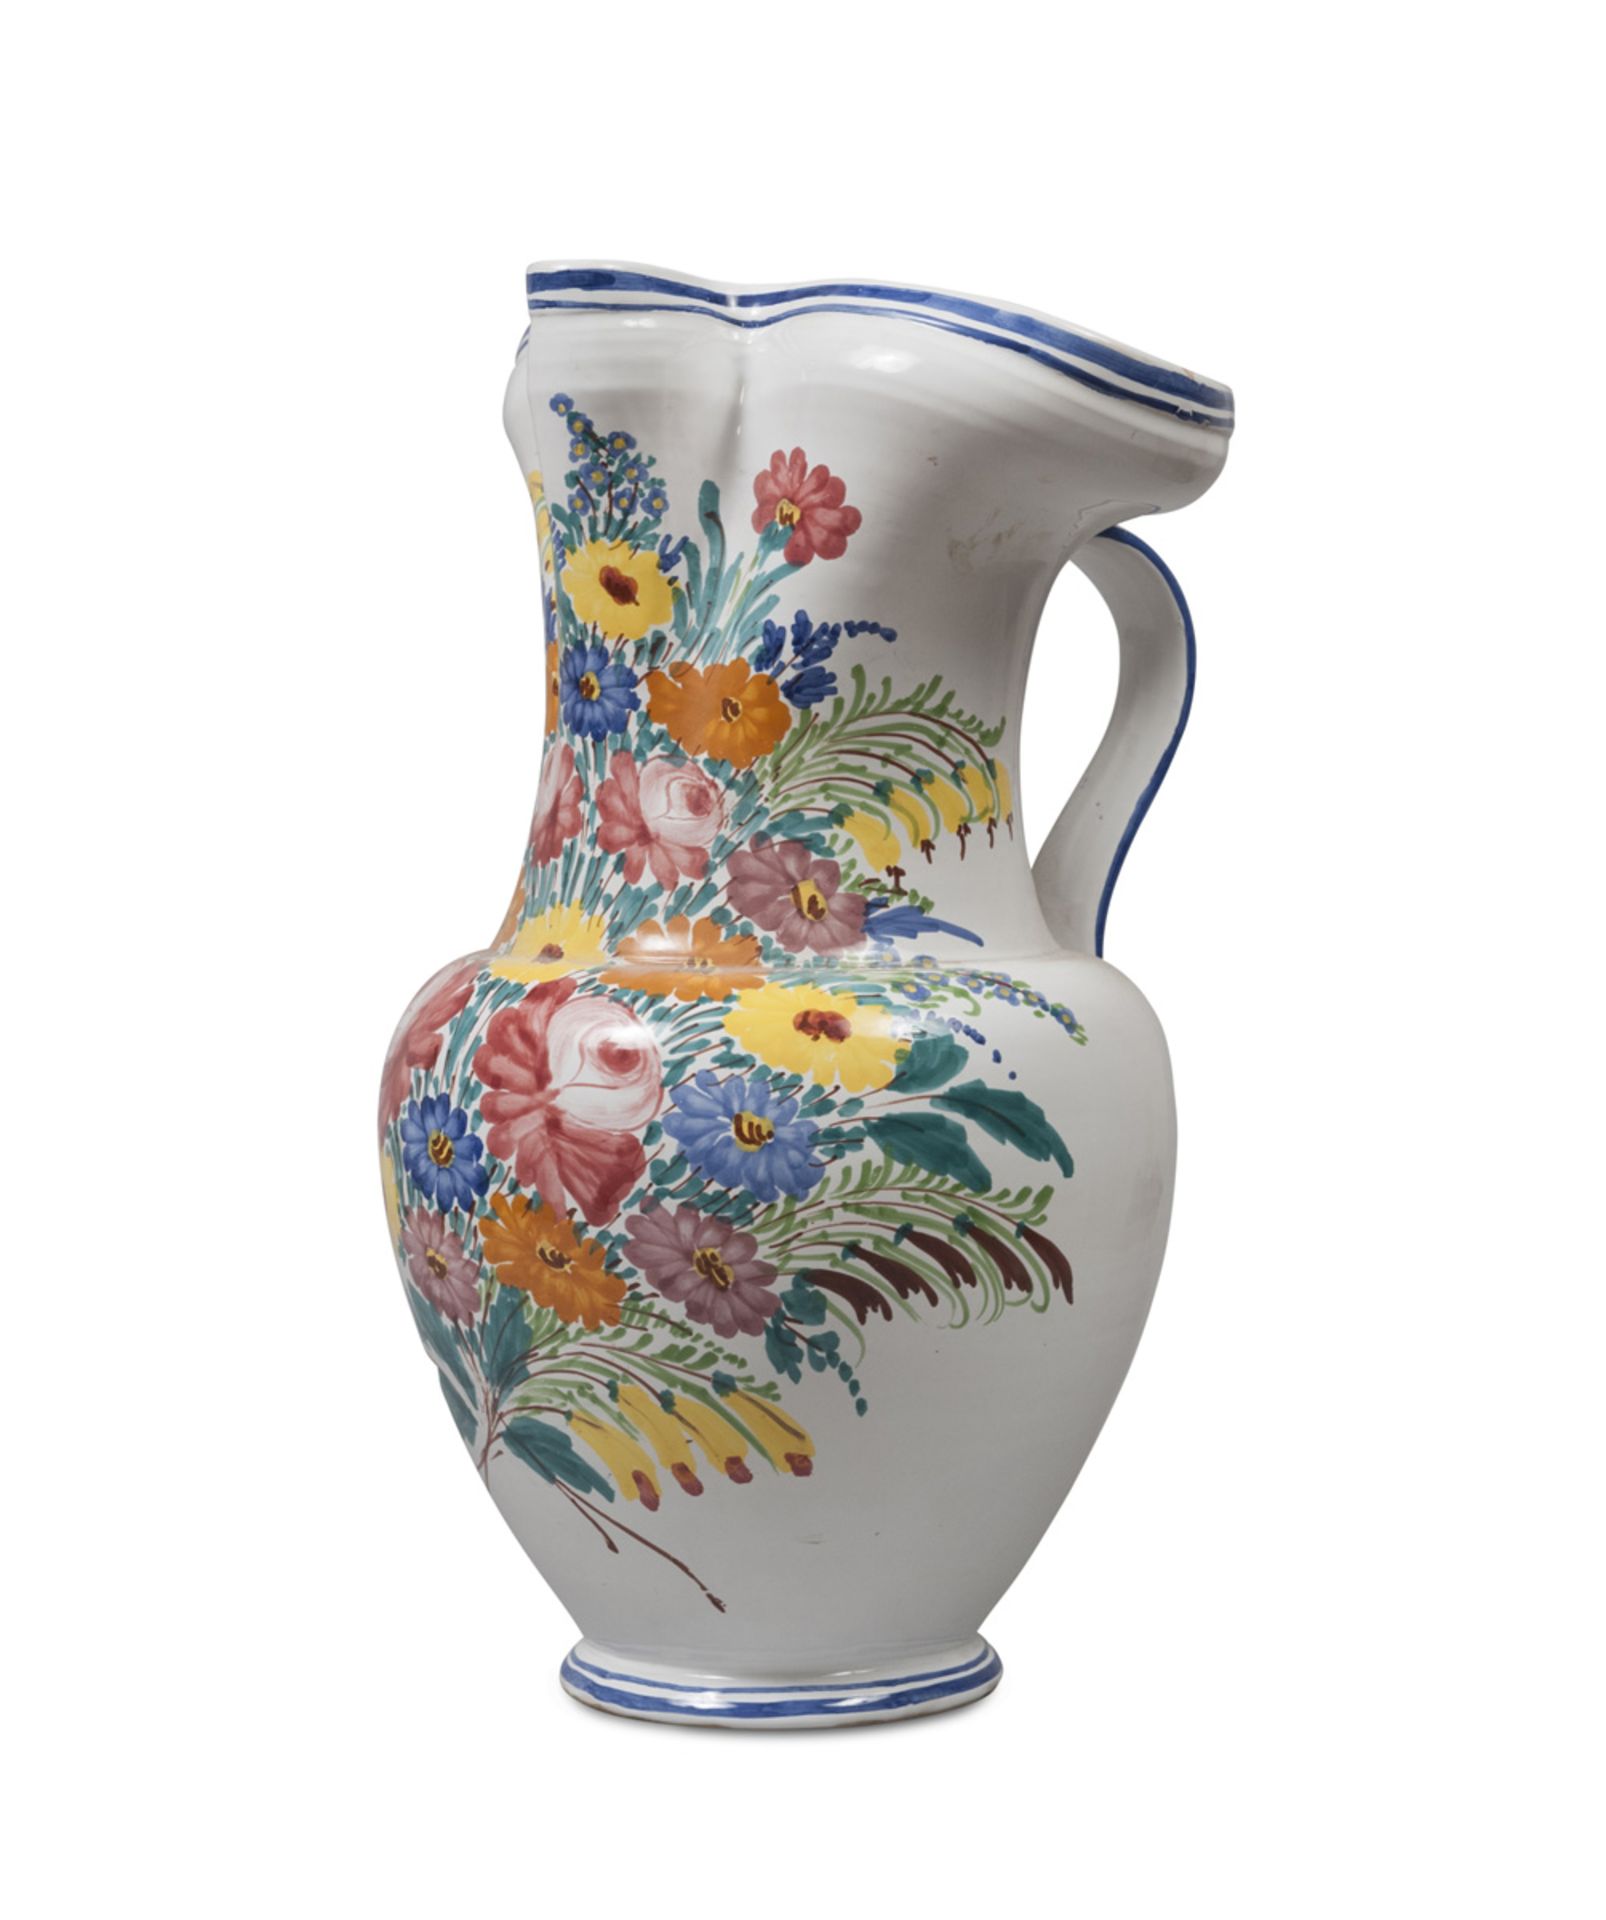 A BIG CERAMIC PITCHER, BRAND BUONTEMPO EARLY 20TH CENTURY in white and polychrome enamel decorated